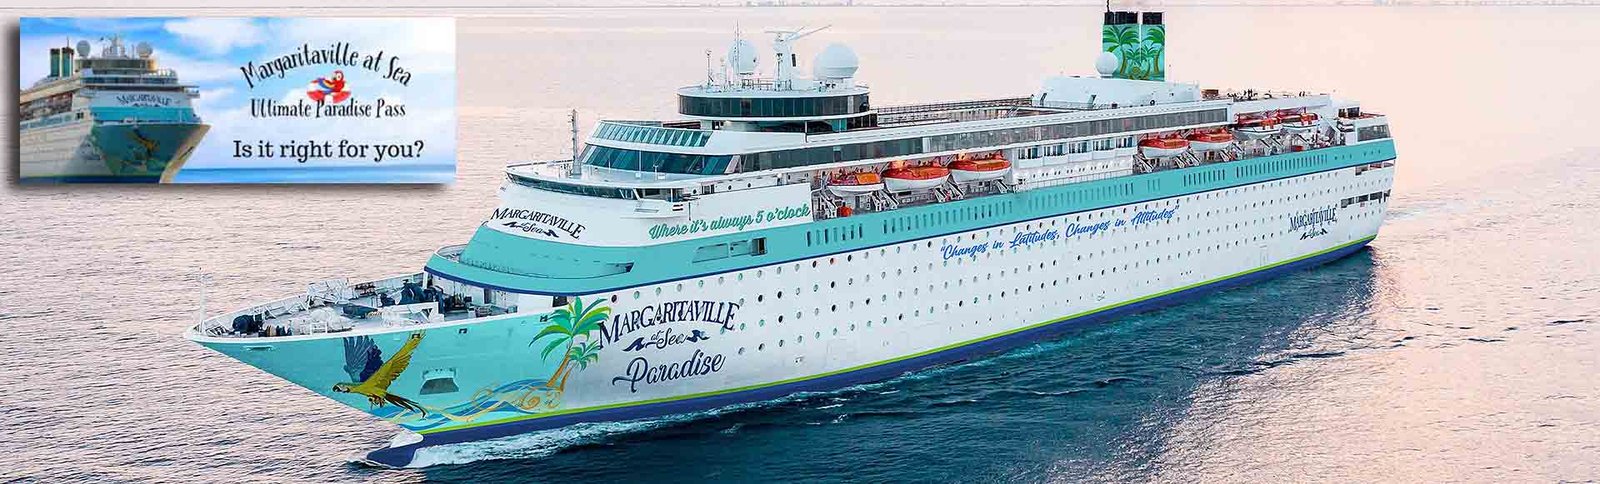 Margaritaville at Sea - The ultimate pass, Is it right for you